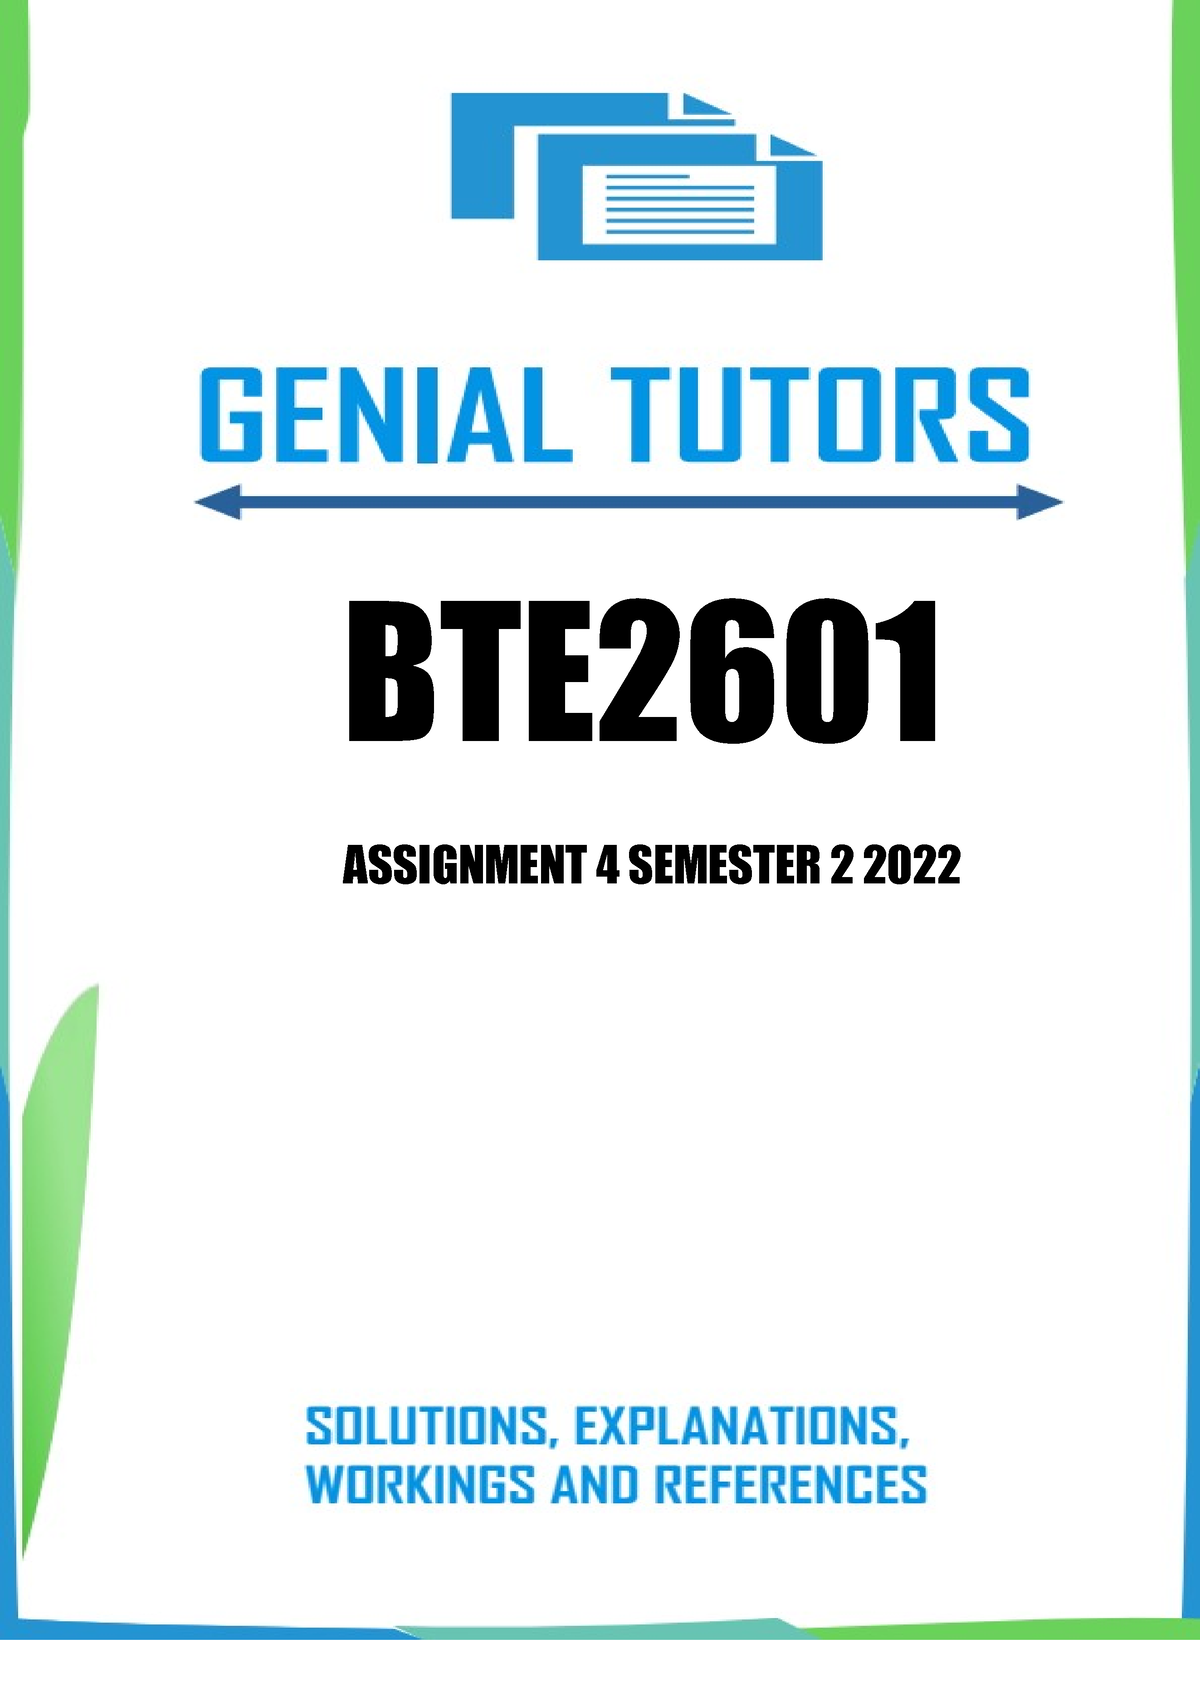 bte2601 assignment 4 answers pdf